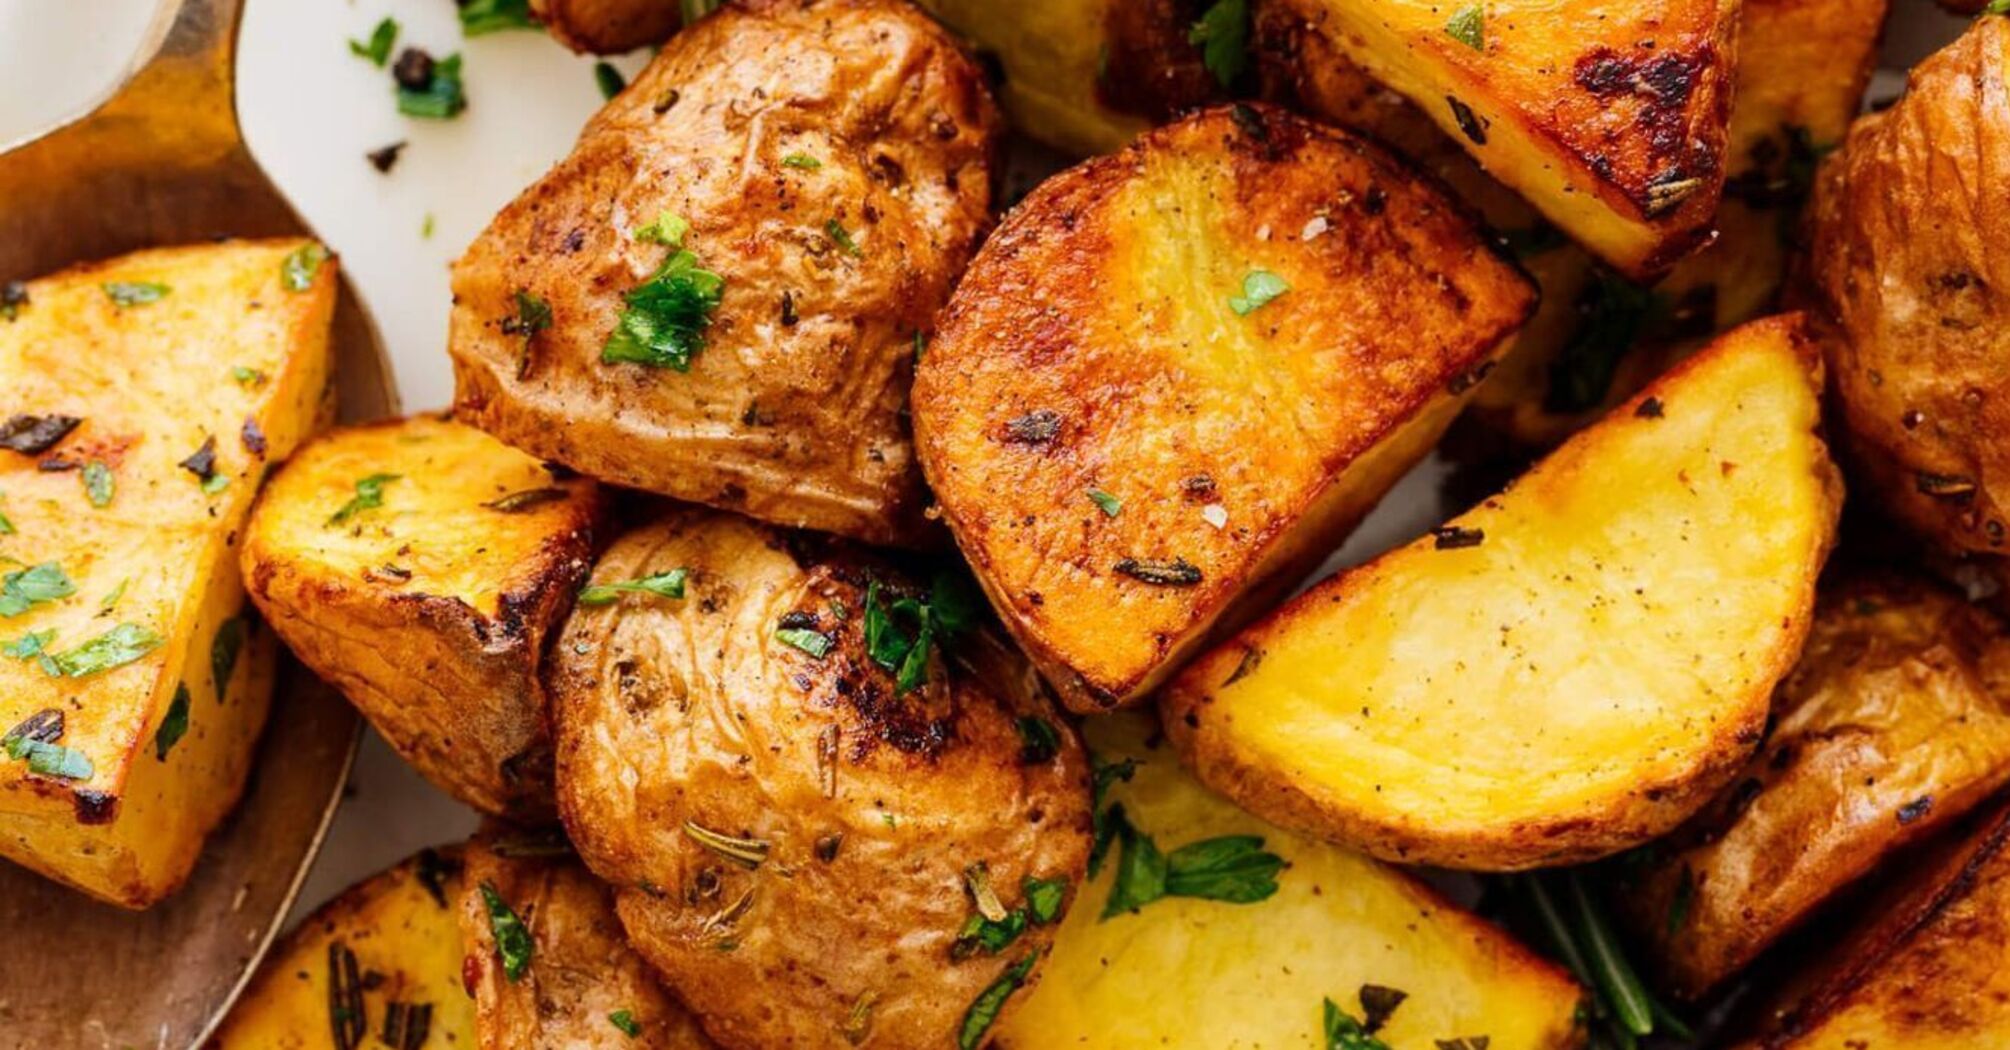 How to cook potatoes deliciously in the oven